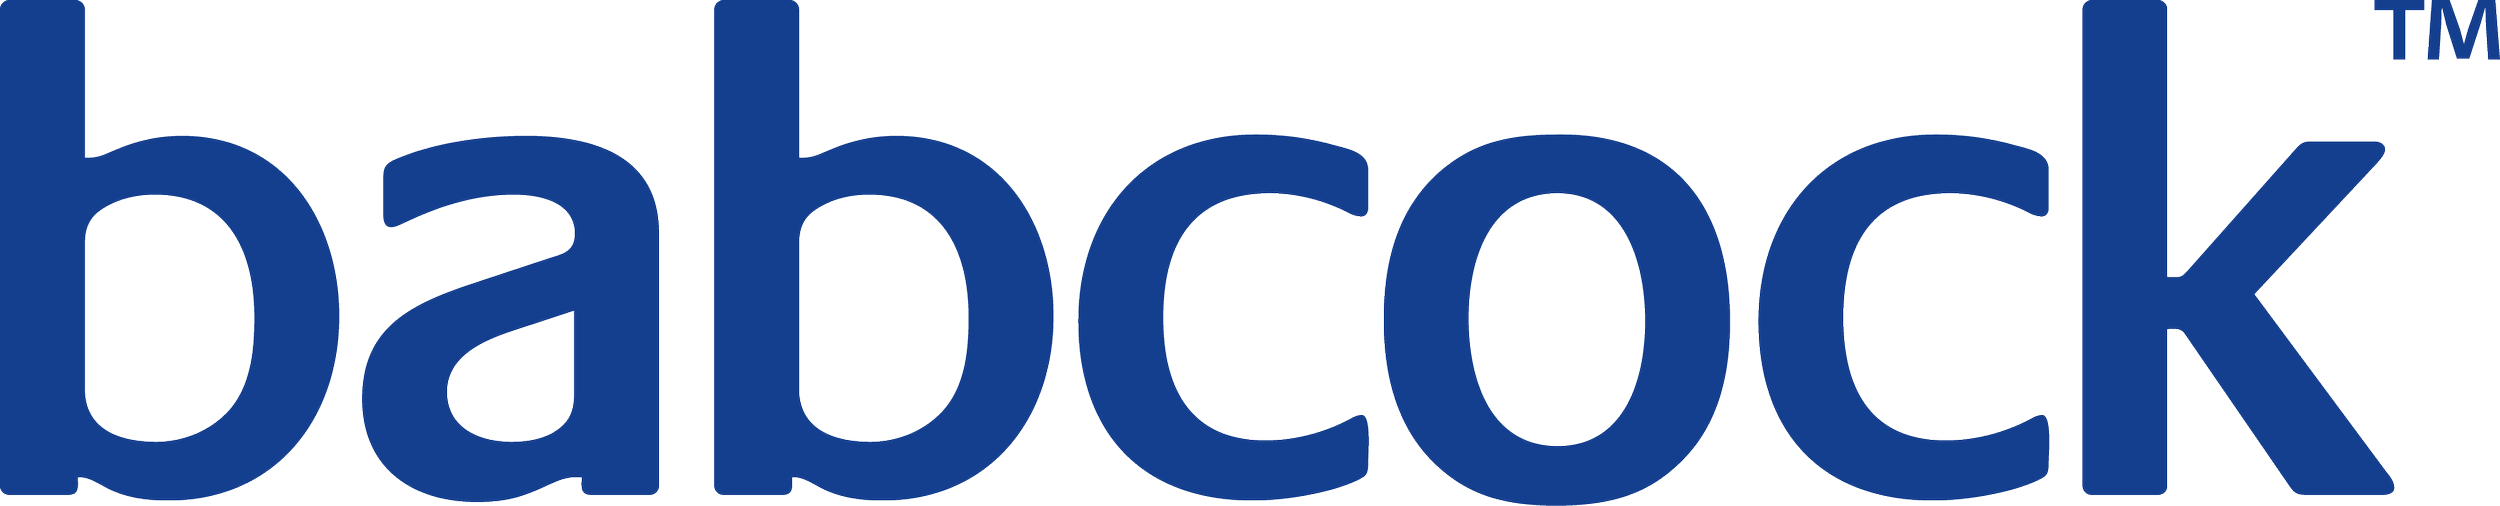 Babcock_Type_Only_BLUE_Logo.png